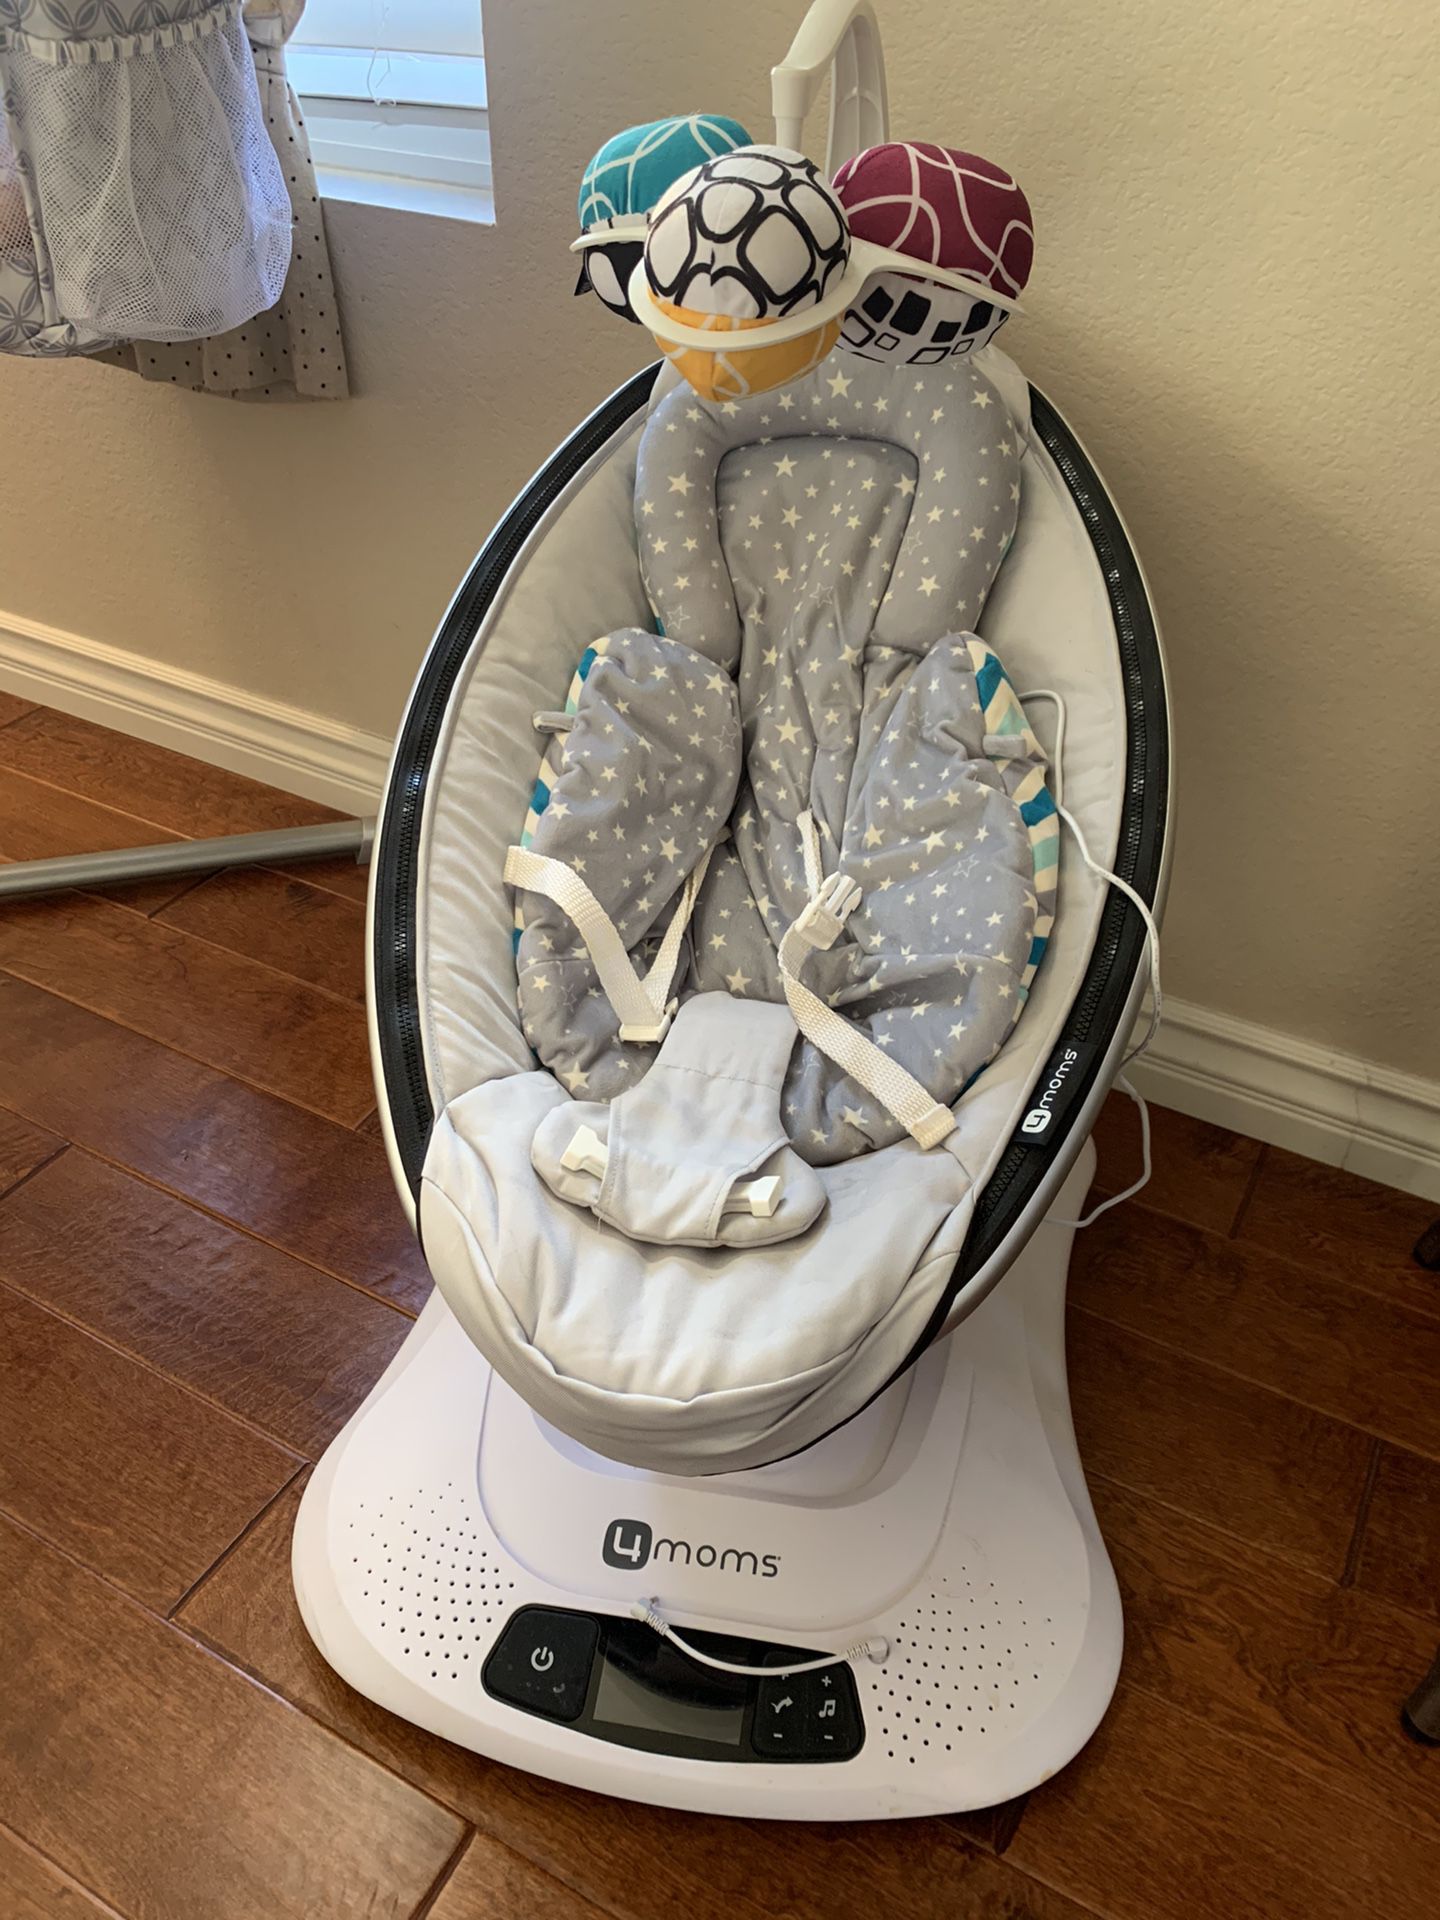 4moms mamaRoo 4 Baby Swing, high-tech Baby Rocker, Bluetooth Enabled - Classic Nylon Fabric with 5 Unique motions